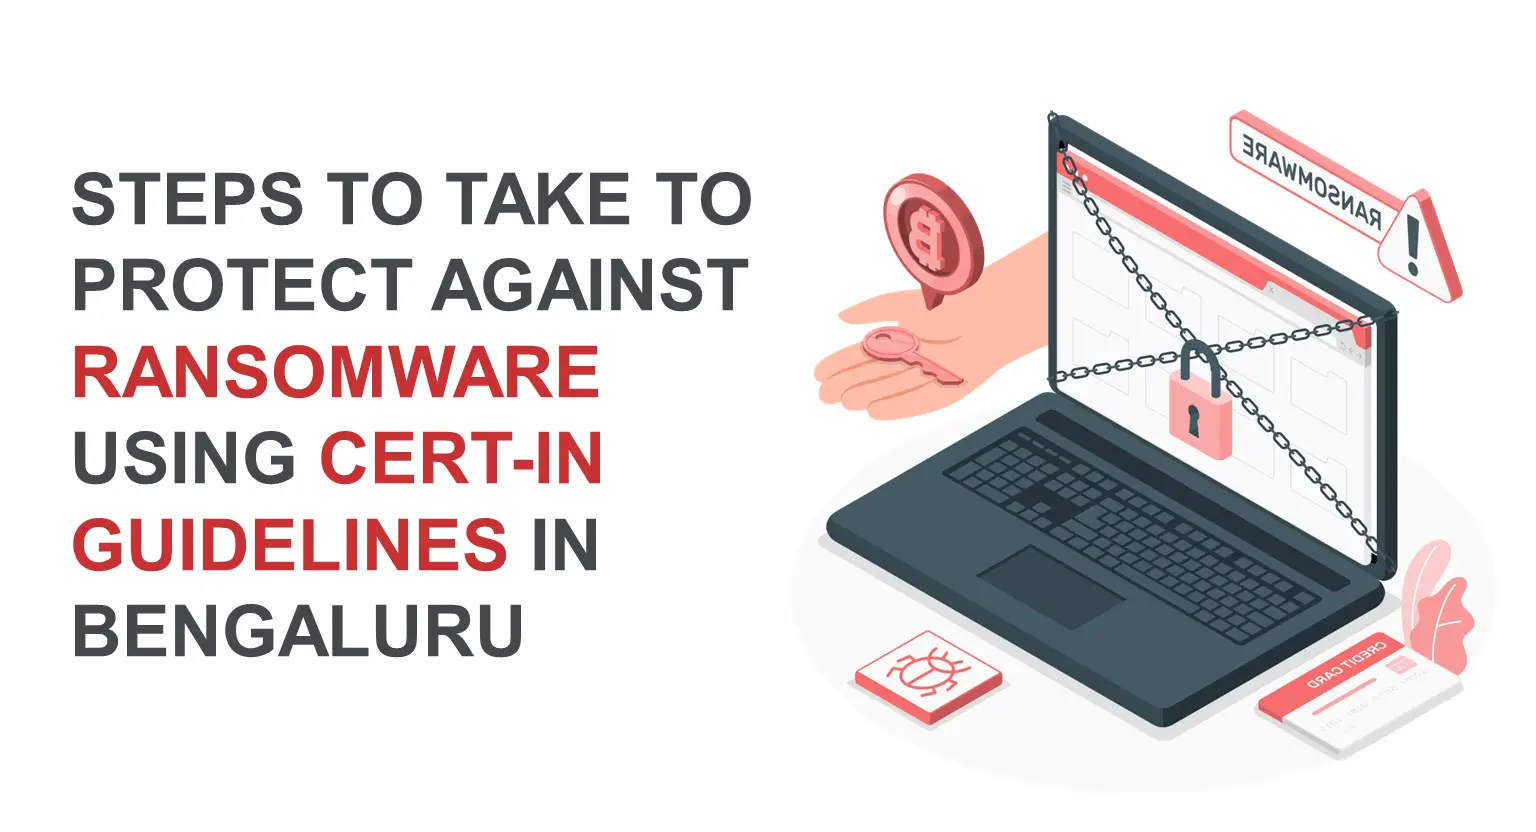 Steps to take to protect against ransomware using CERT-In guidelines in Bengaluru